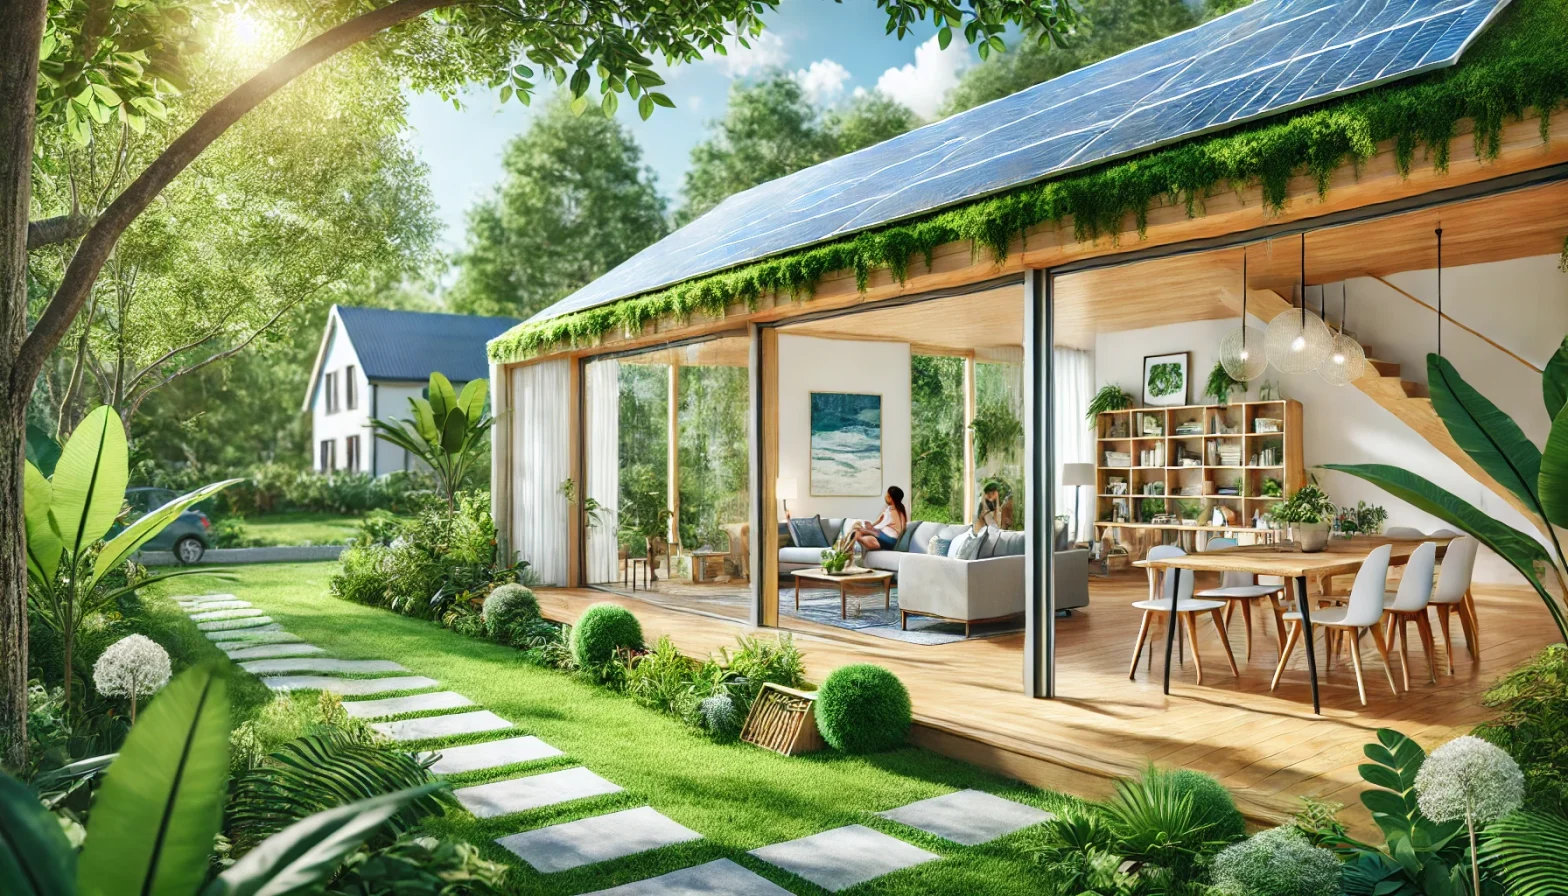 Image of a rendering of an eco friendly home